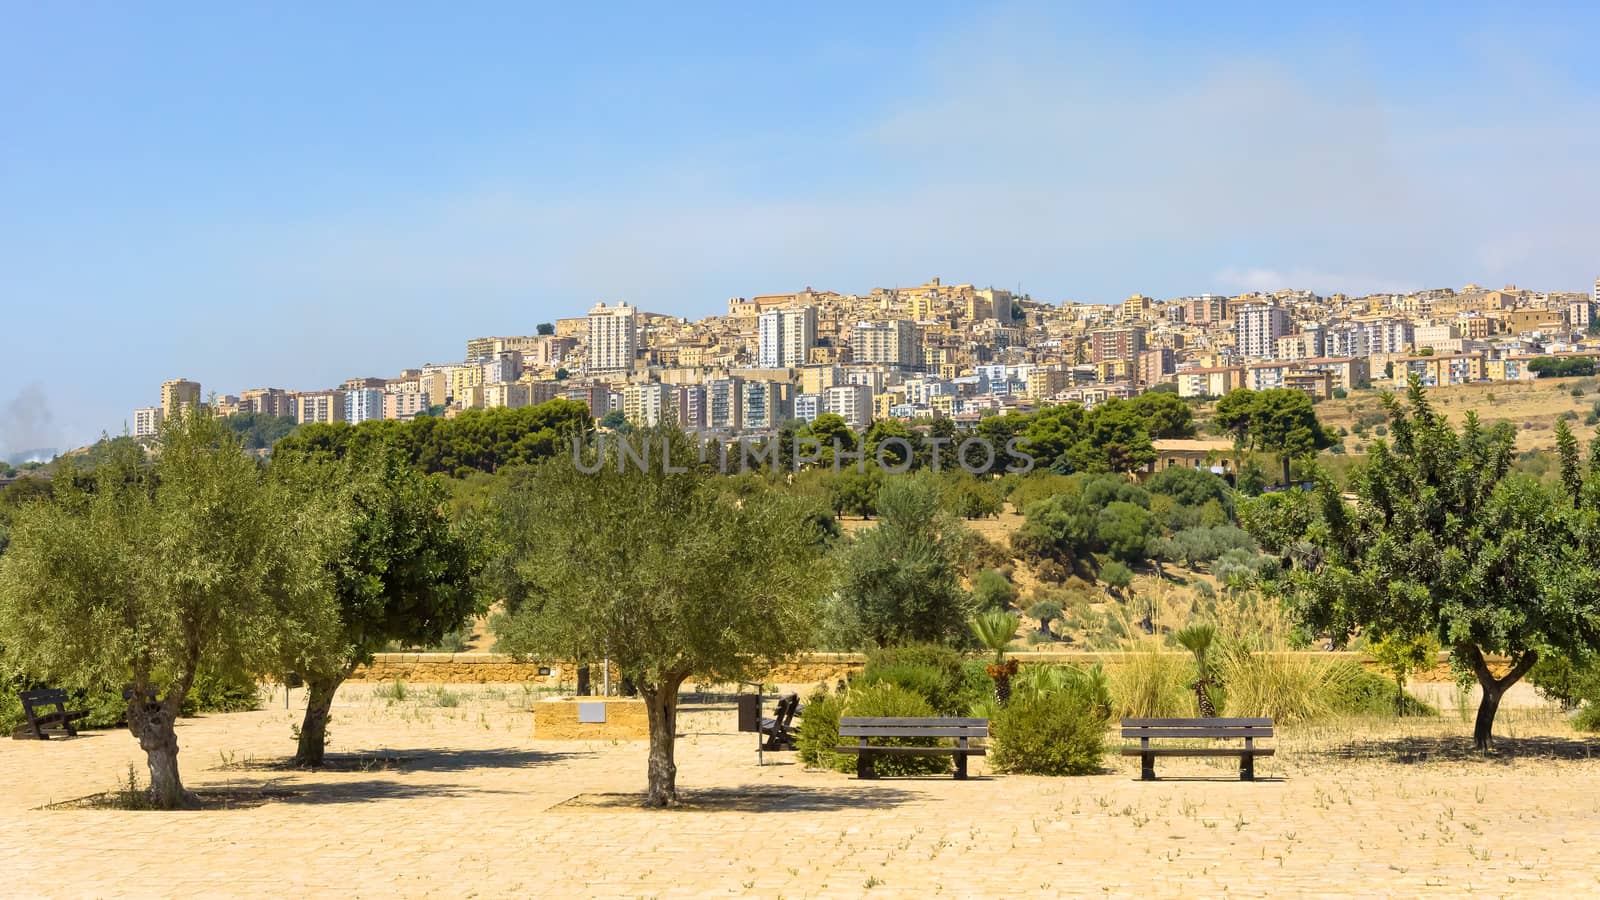 Panoramic view of Agrigento city on the southern coast of Sicily, Italy